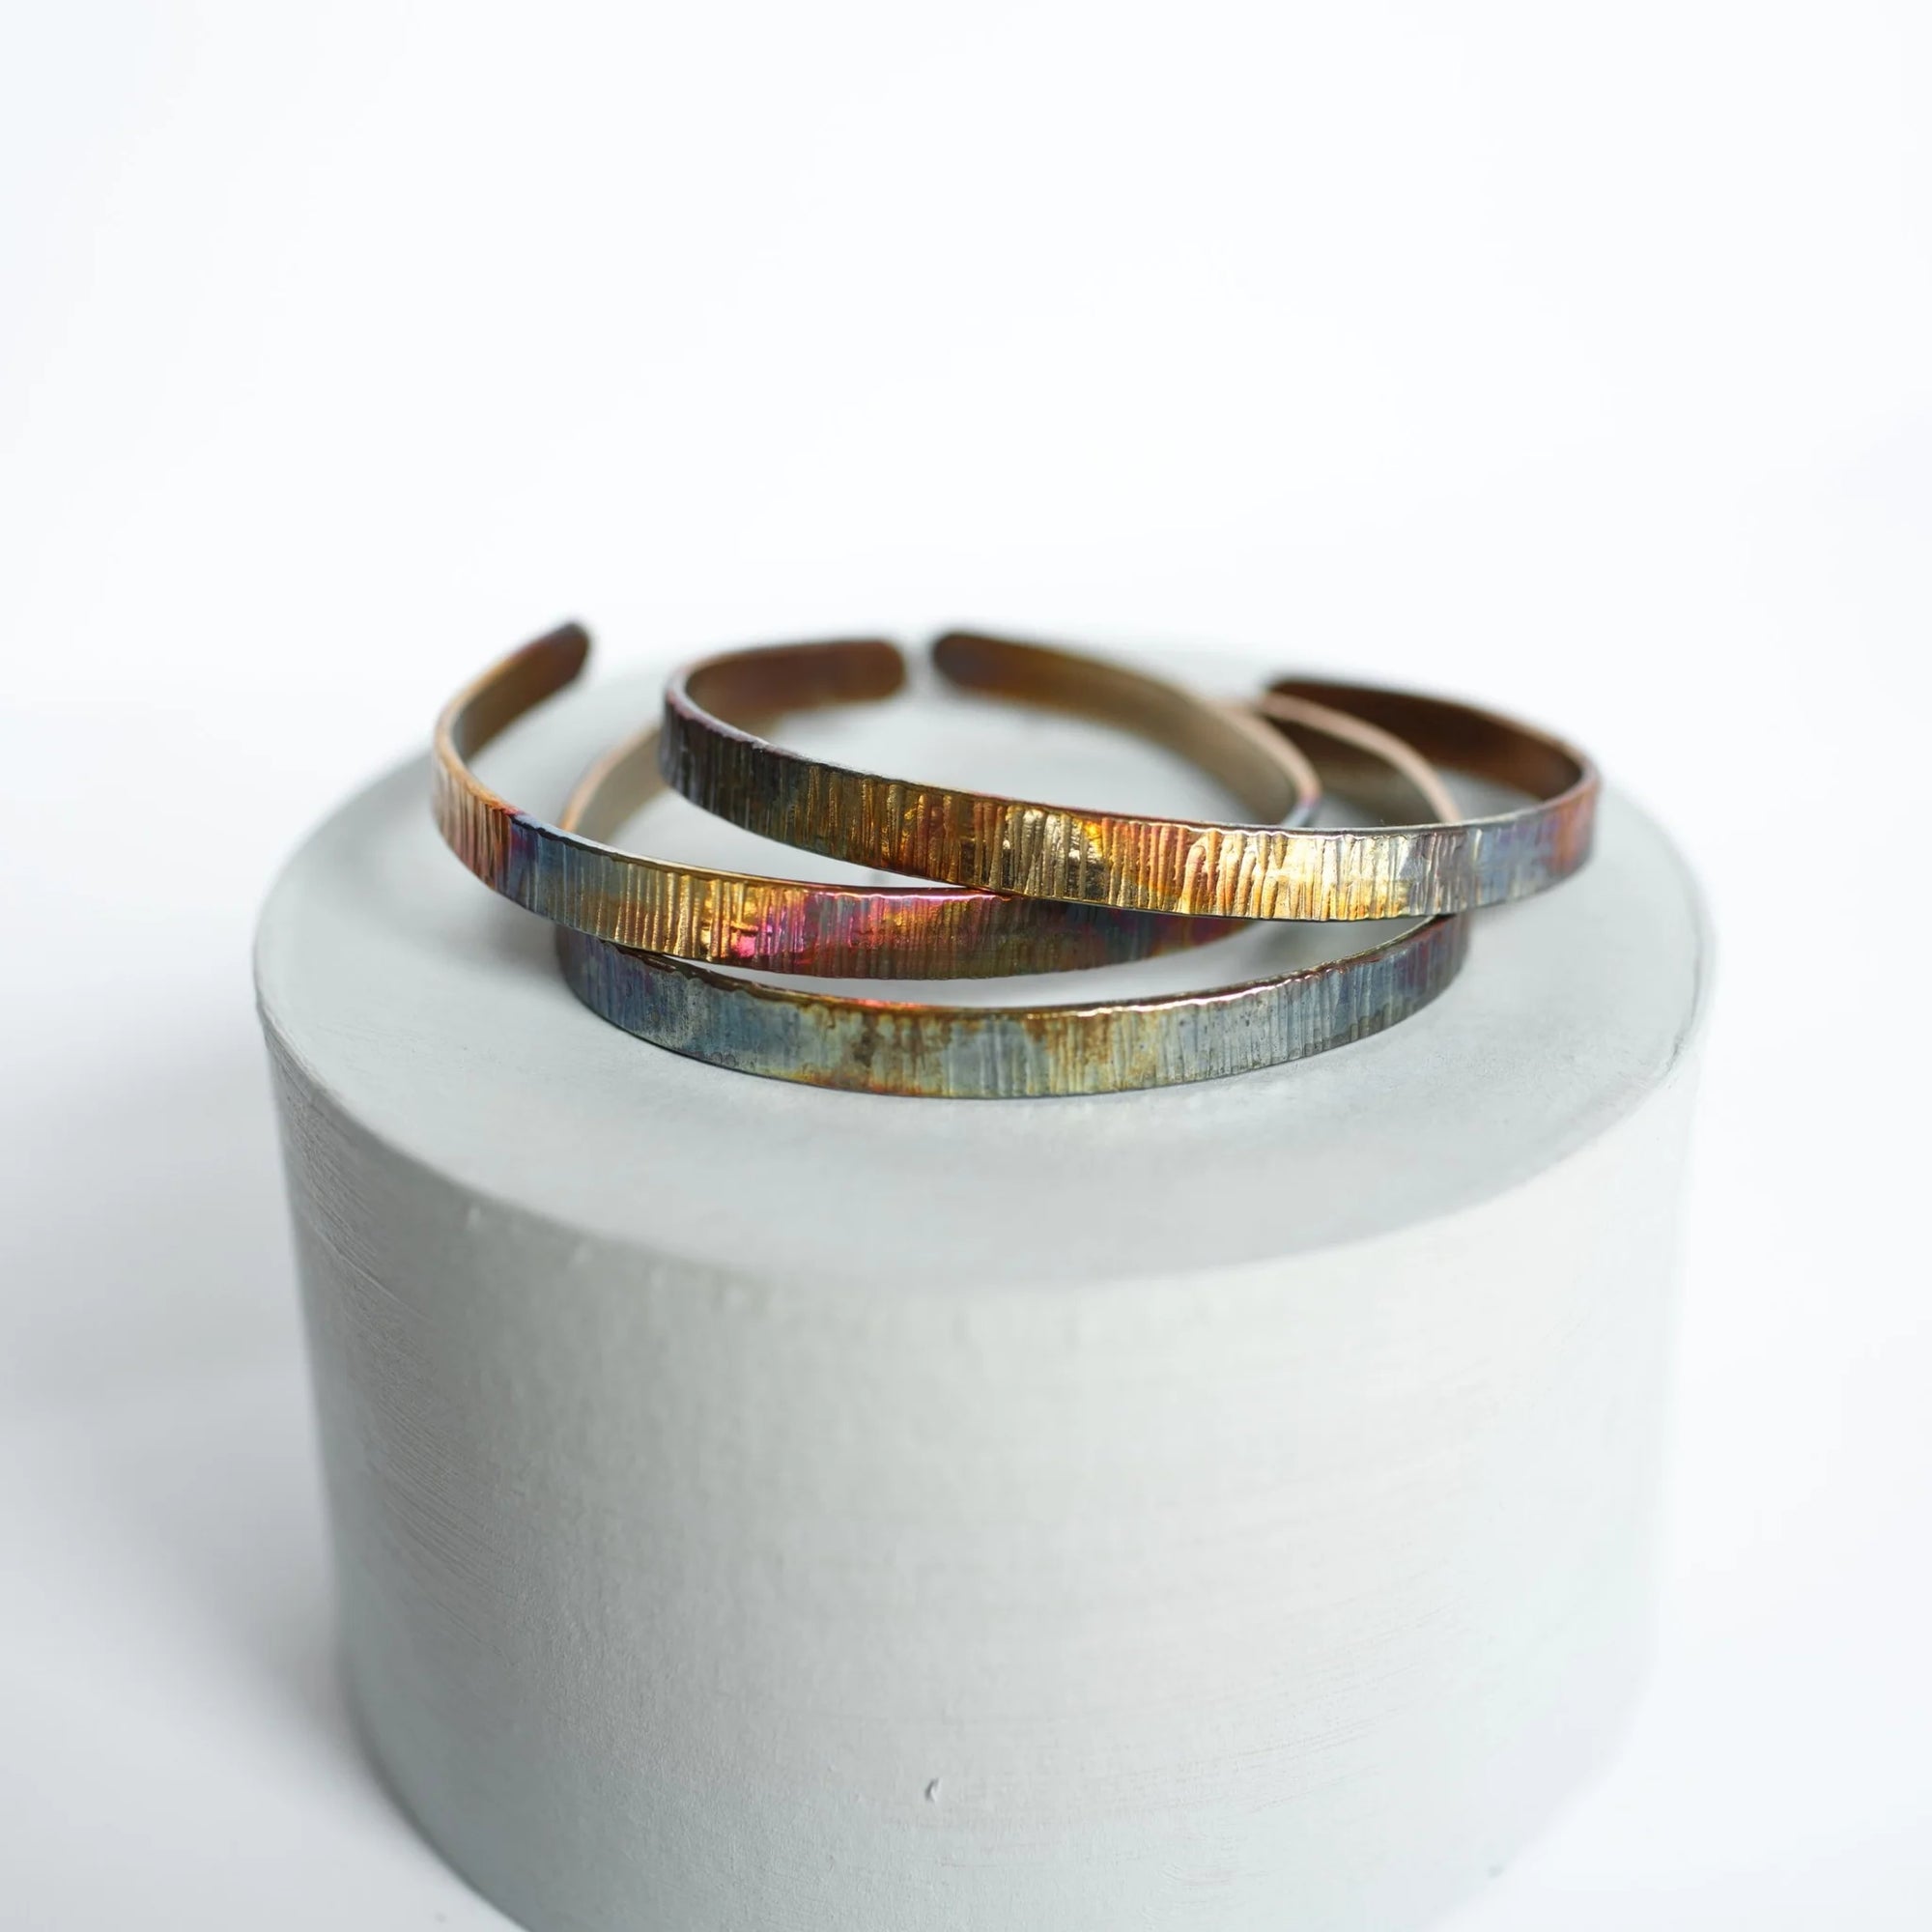 Mend on the Move - Refined Through Fire Wrist Cuff